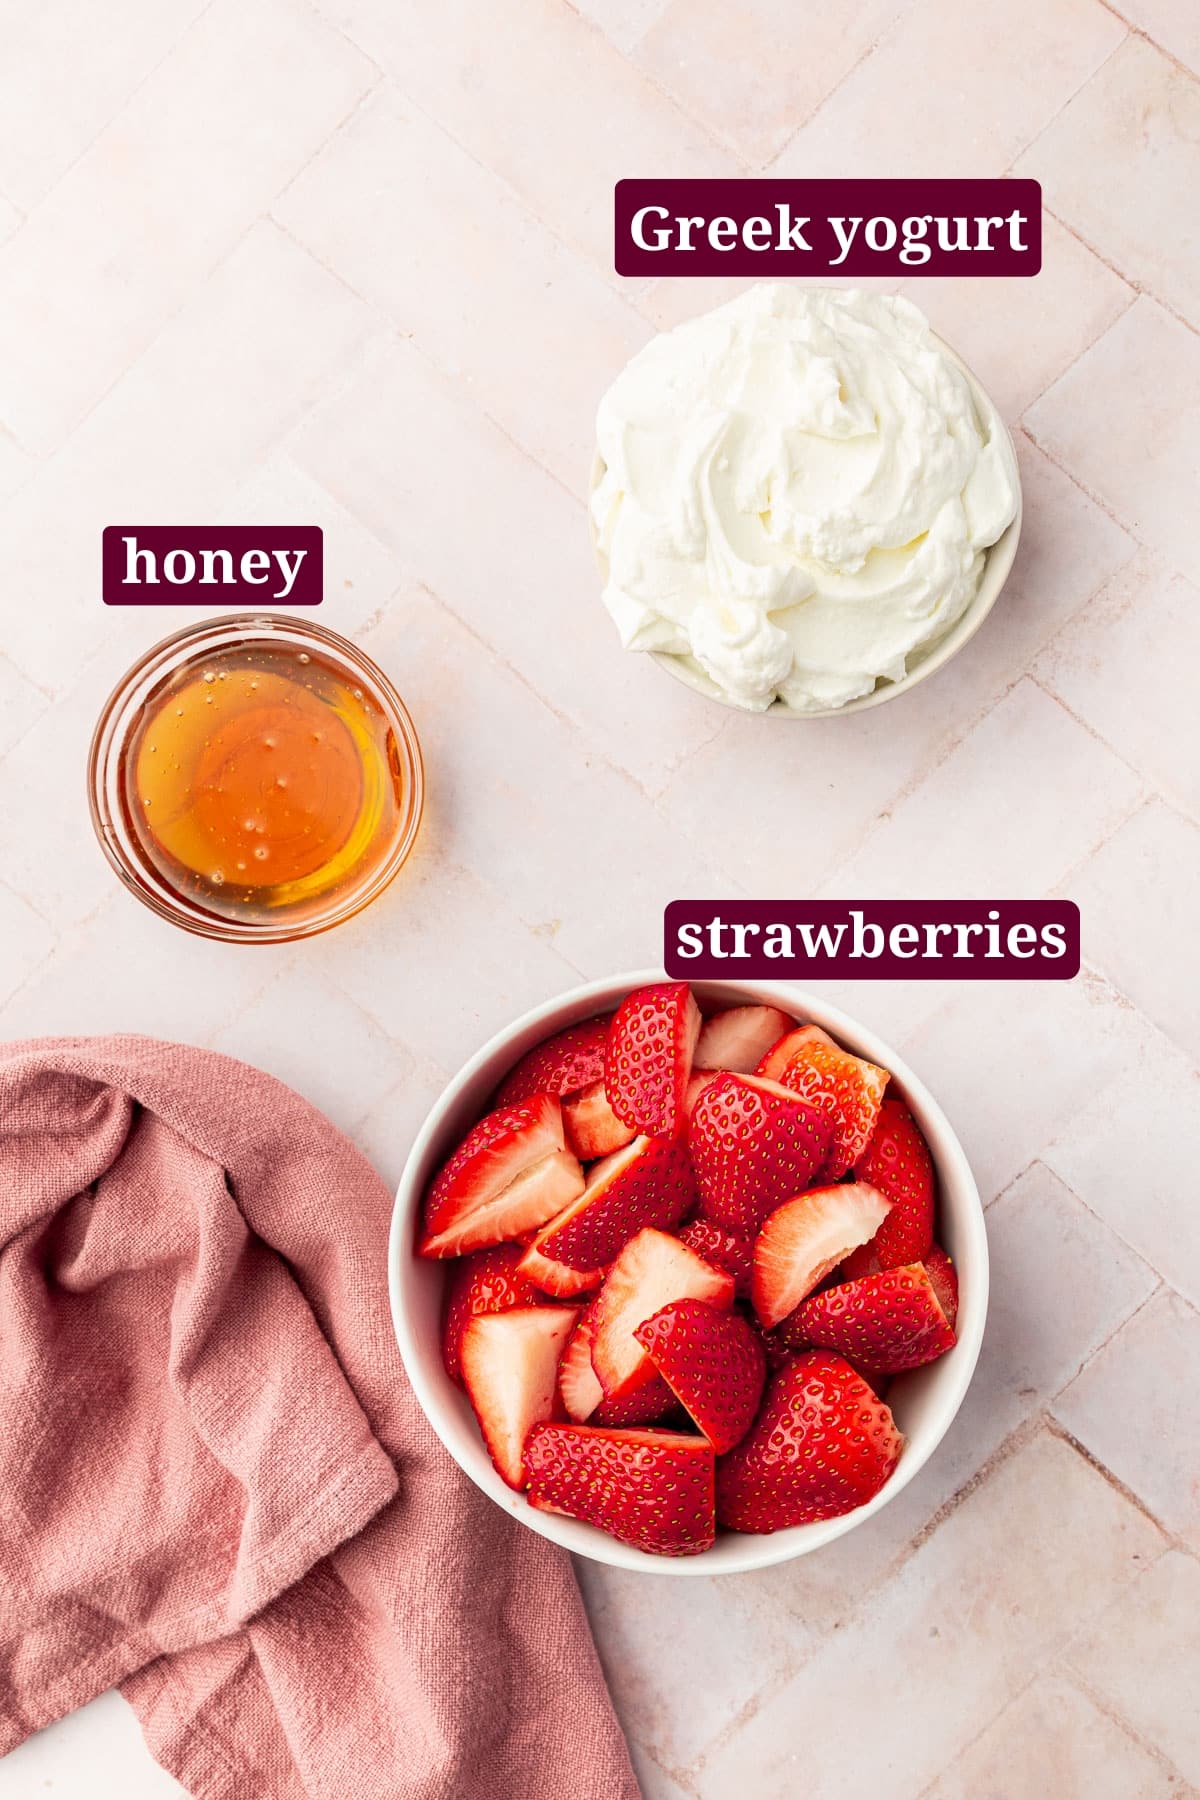 A bowl of strawberry quarters, a small bowl of honey, and a medium bowl of Greek yogurt on a pink table with text overlays over each ingredient.